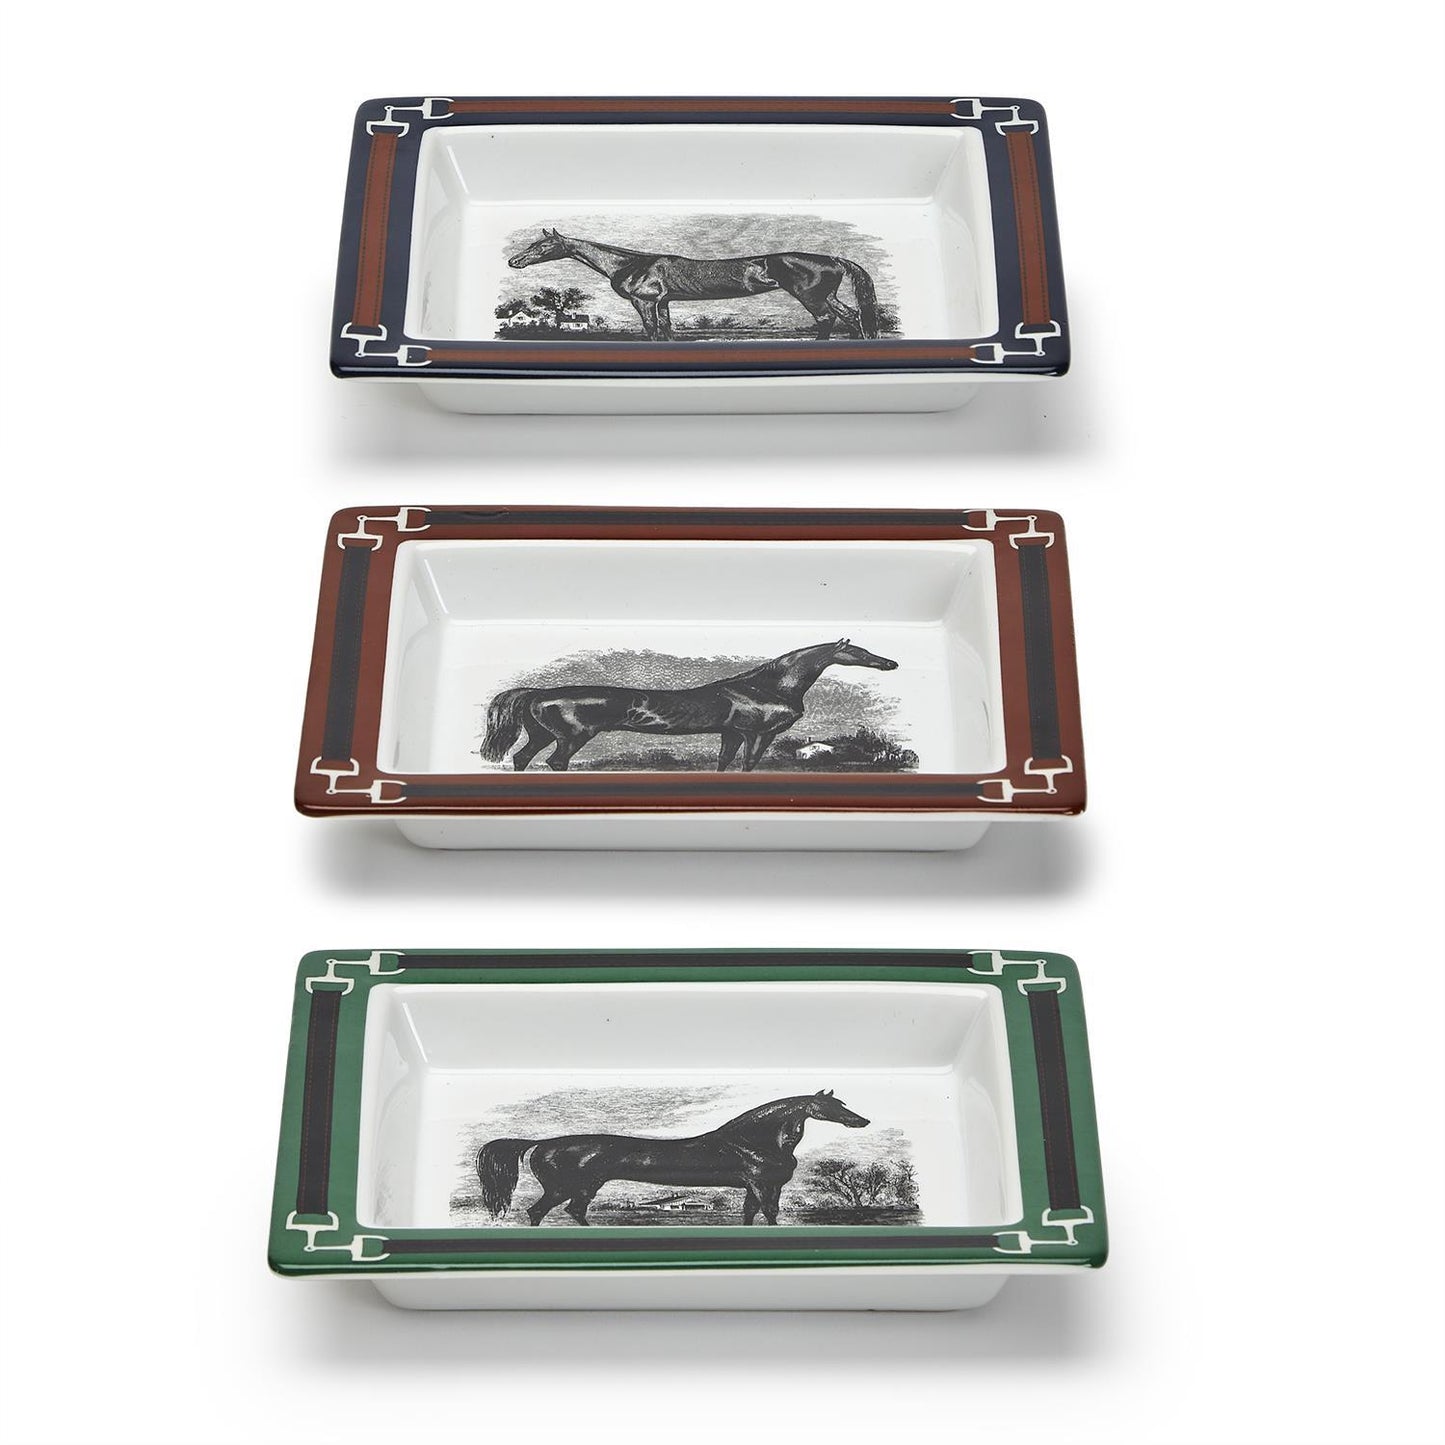 Two's Company Equus Decorative Desk Trays In Gift Box Asst 3 Designs / Colors